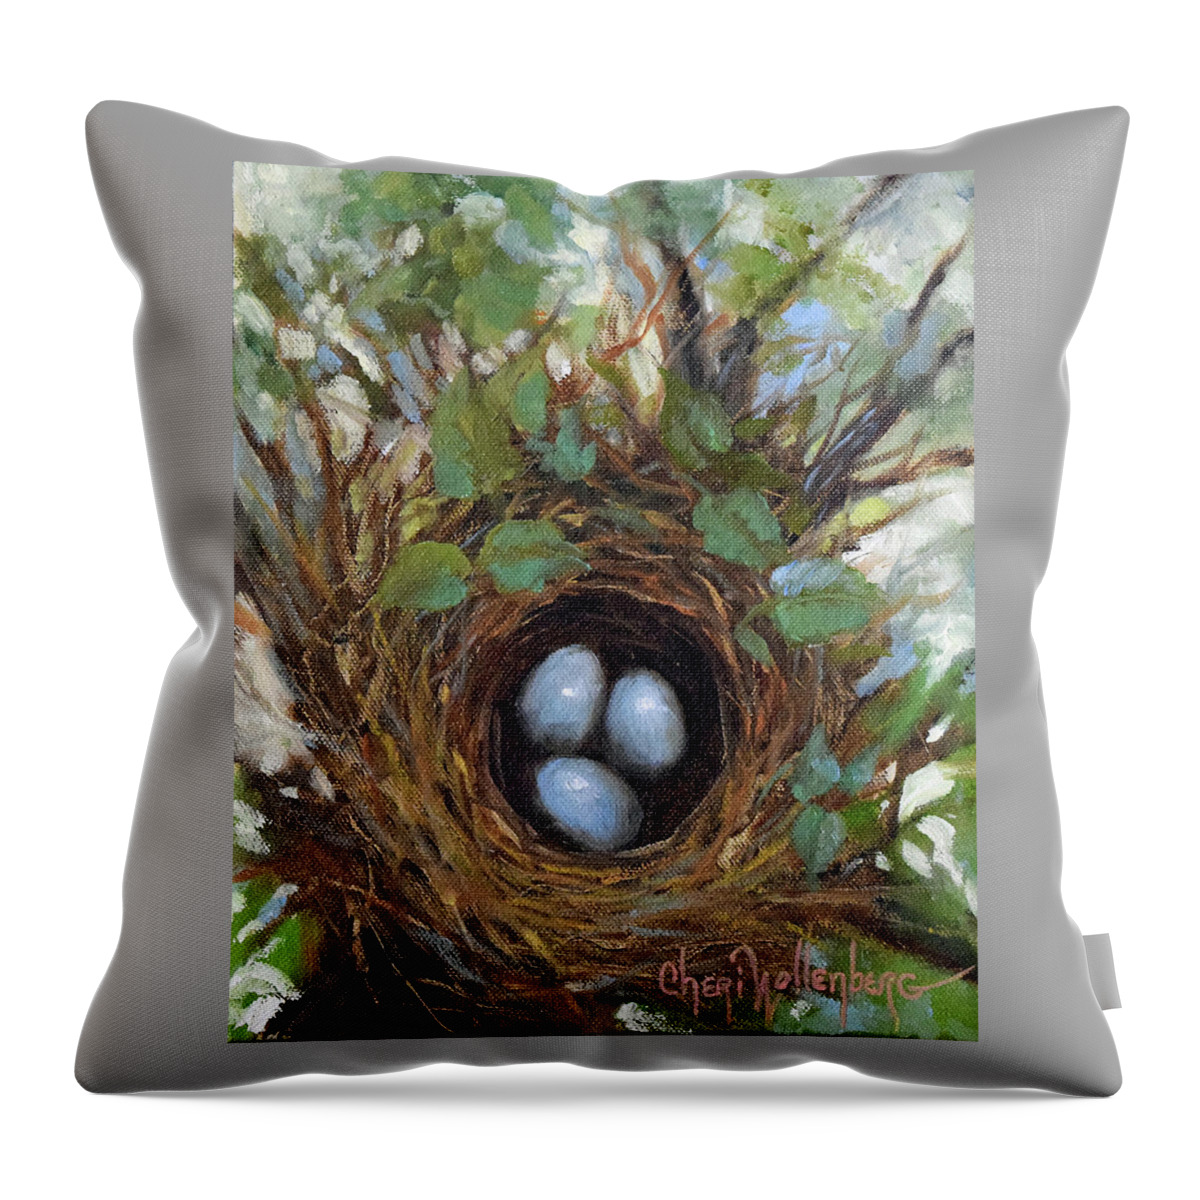 Robins Eggs Throw Pillow featuring the painting 2019 Spring Bird Nest I by Cheri Wollenberg